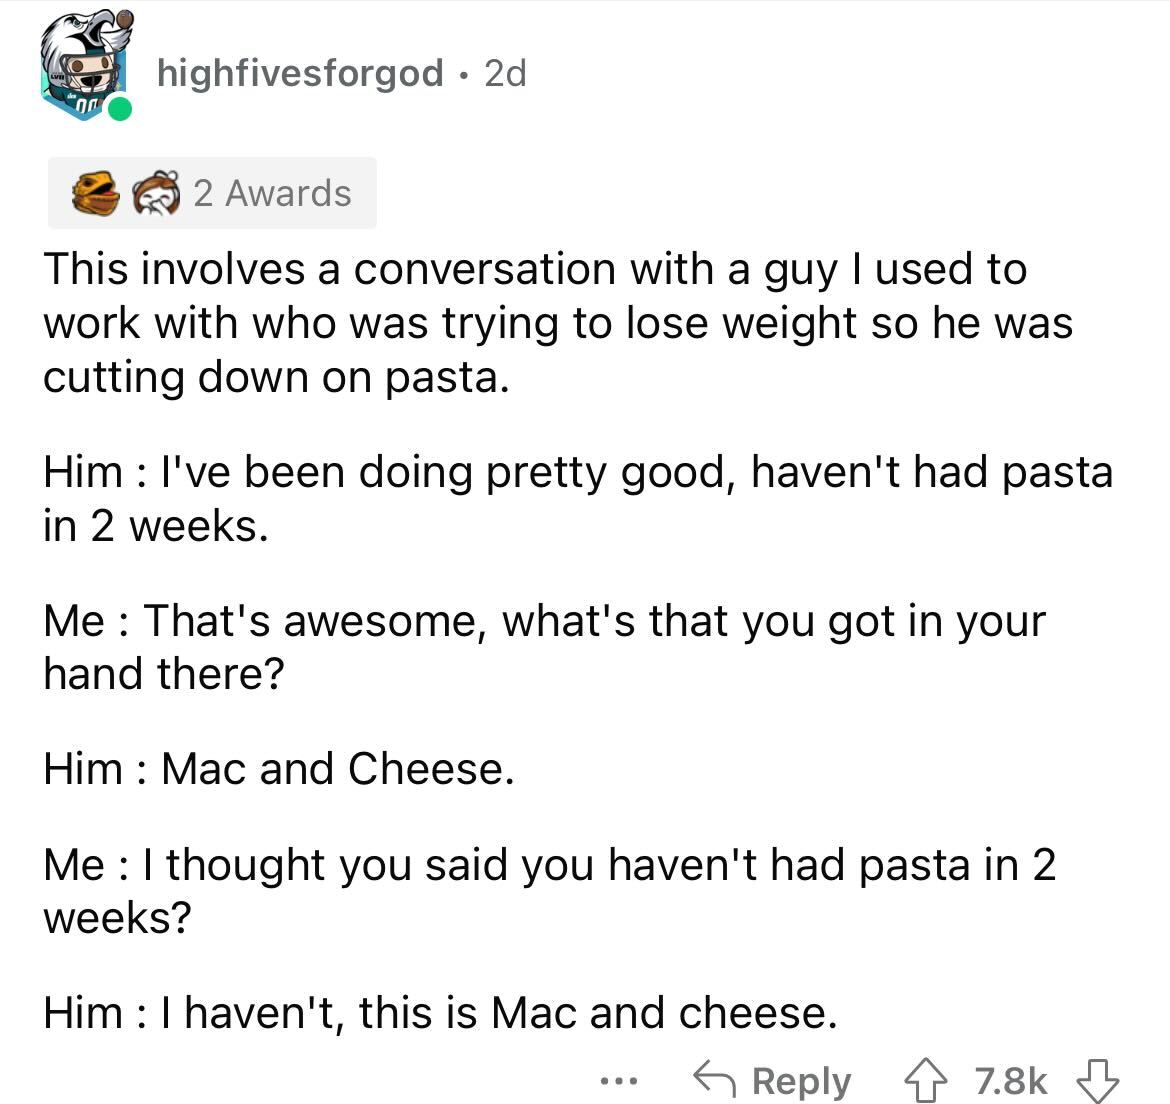 document - highfivesforgod 2d 2 Awards This involves a conversation with a guy I used to work with who was trying to lose weight so he was cutting down on pasta. Him I've been doing pretty good, haven't had pasta in 2 weeks. Me That's awesome, what's that